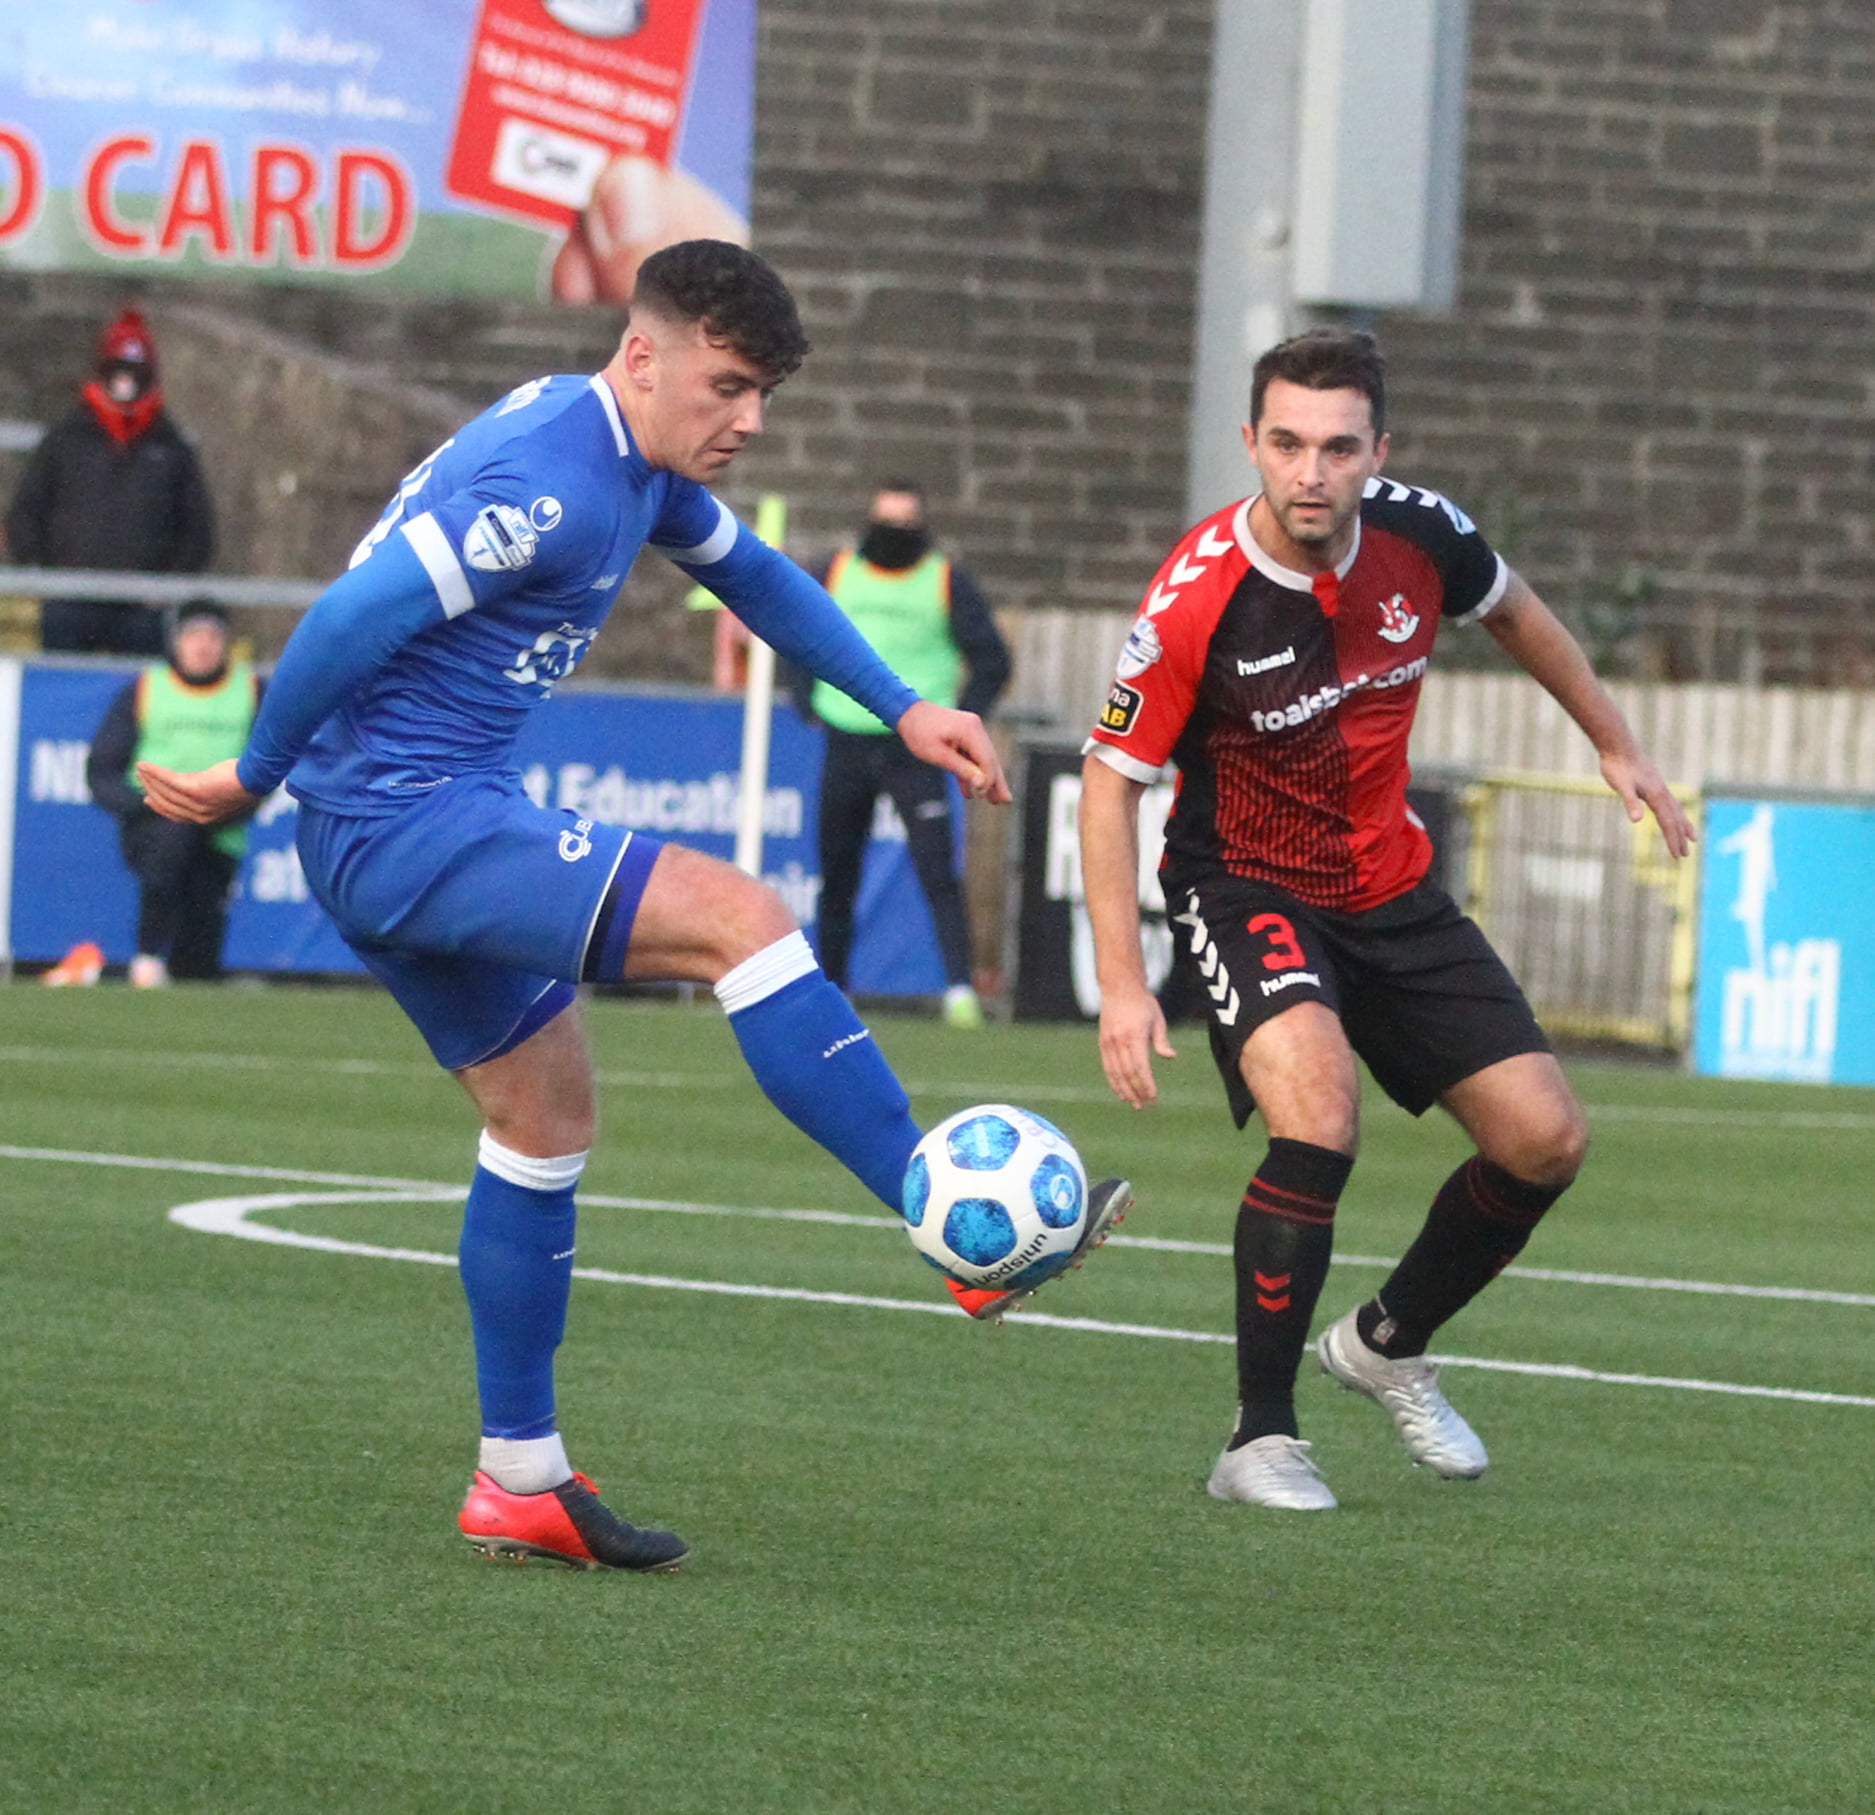 Swifts record first win under Shiels